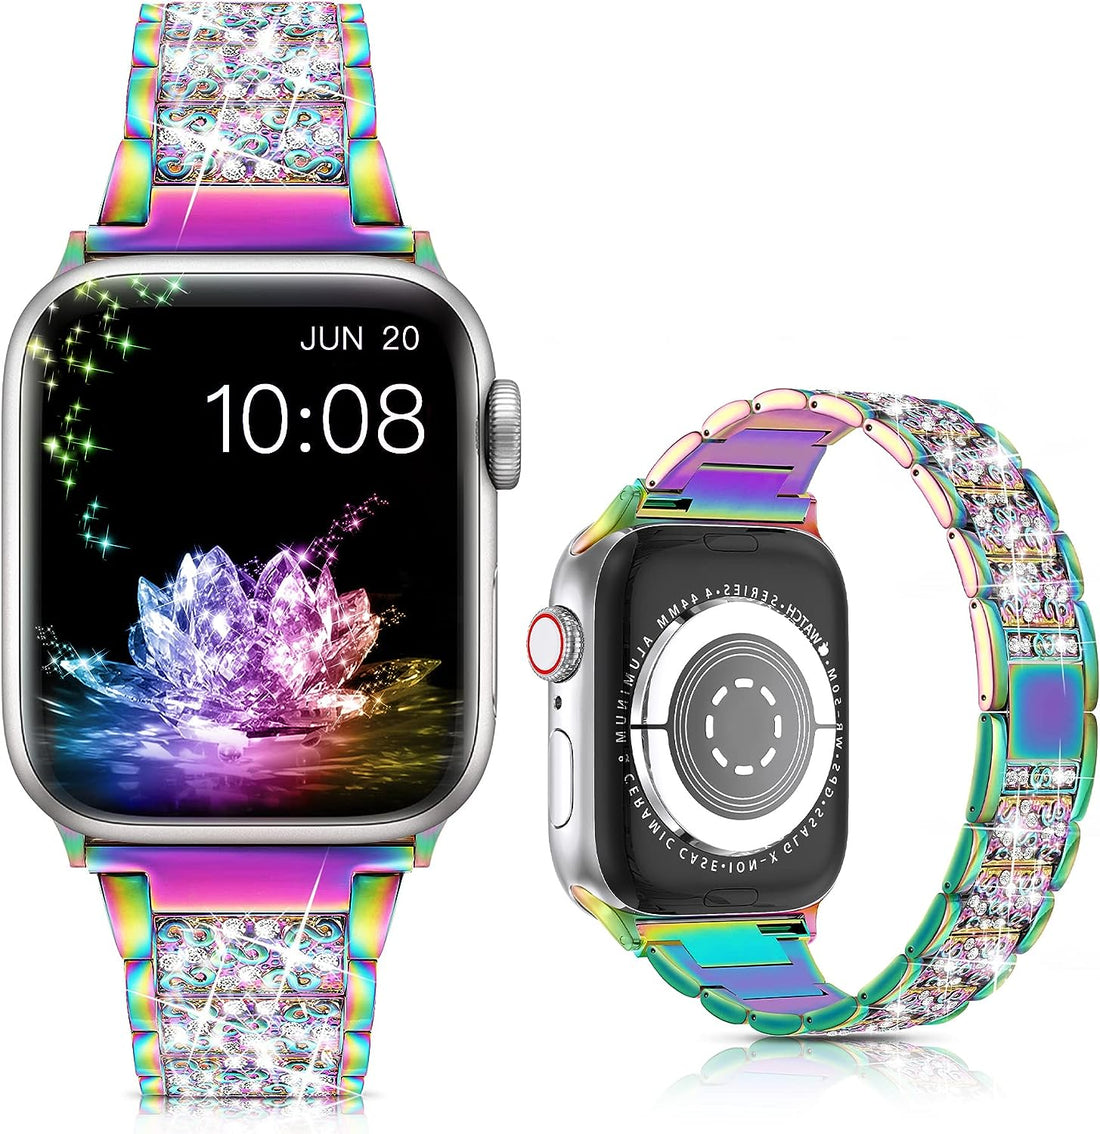 "A Complete Guide to Apple Watch Bands for Women: Sizing, Styles, and More"